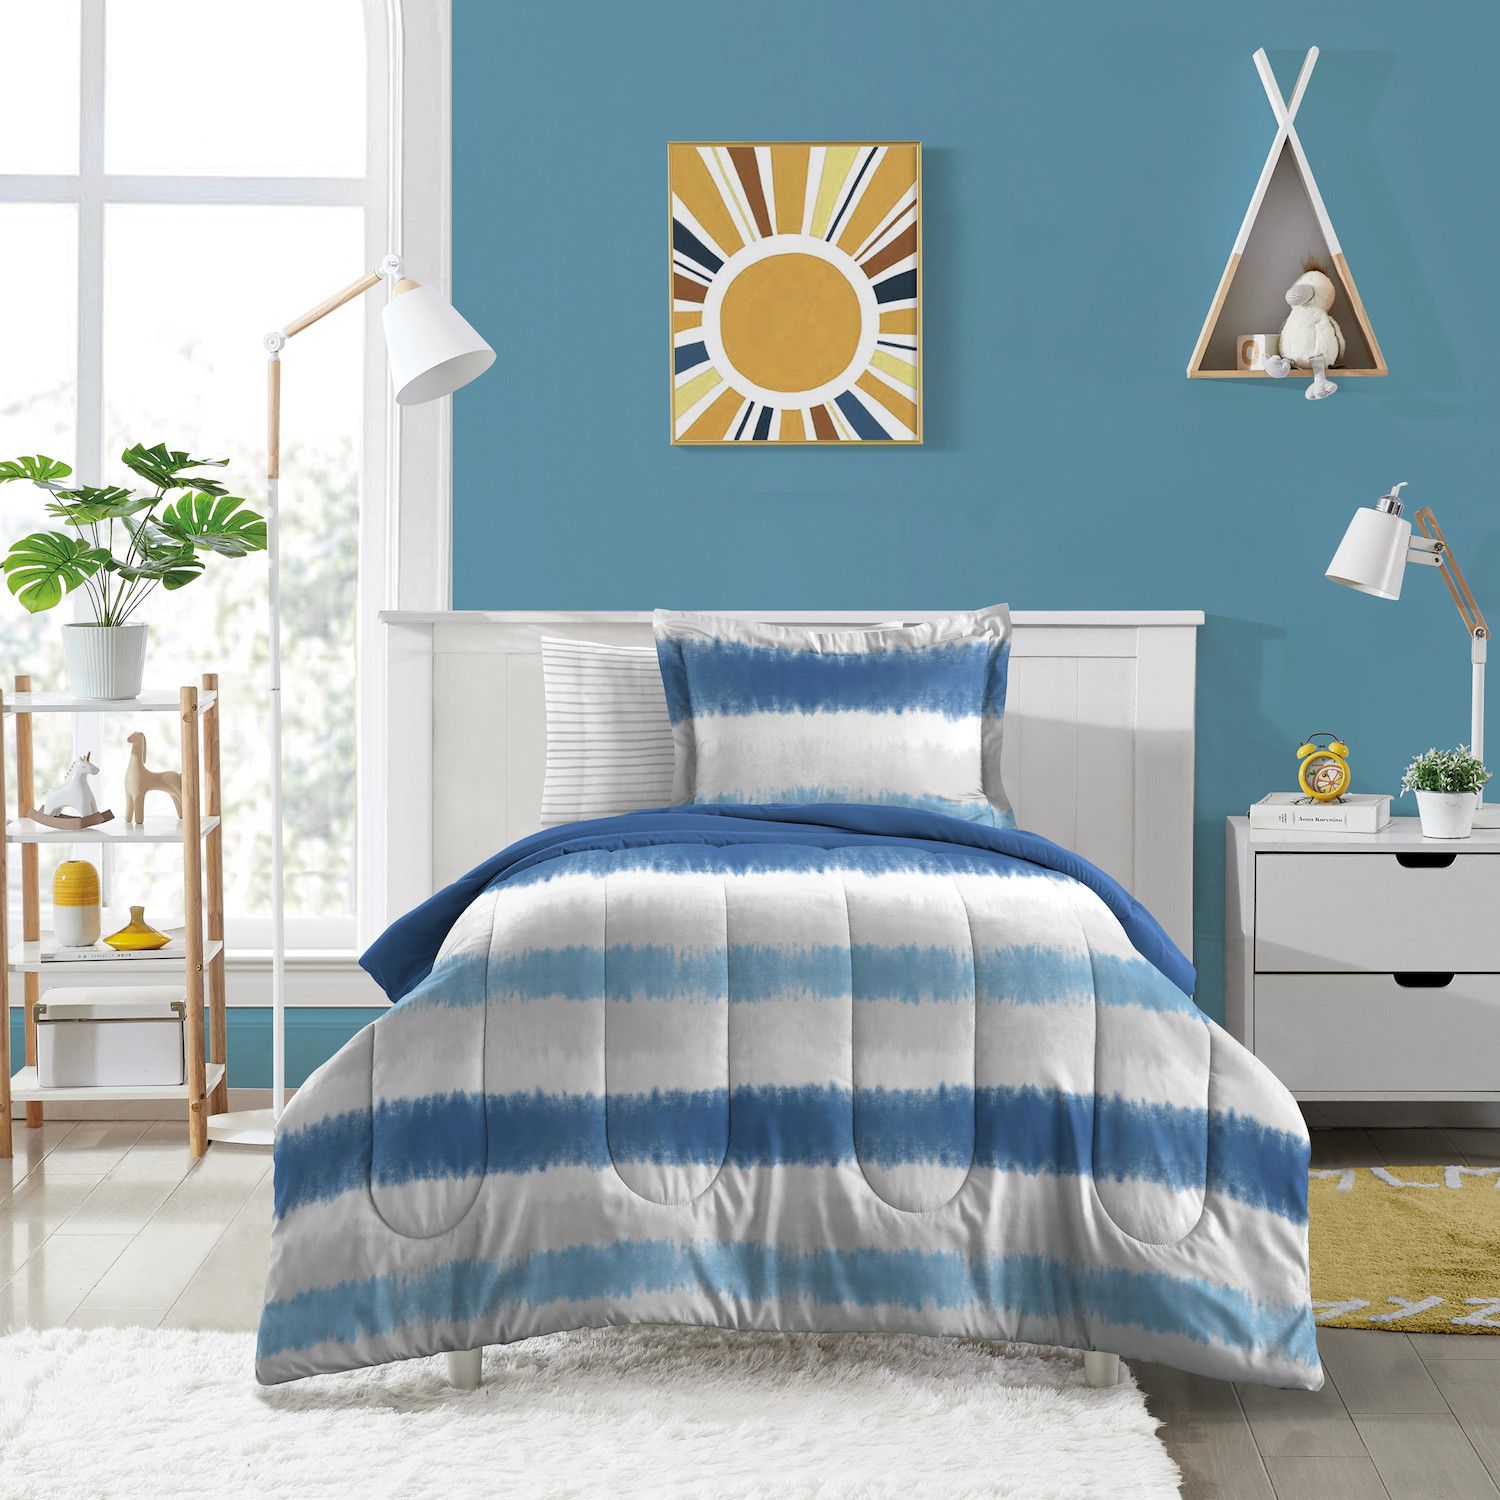 Image for Dream Factory Tie Dye Stripe Comforter Set with Shams at Kohl's.